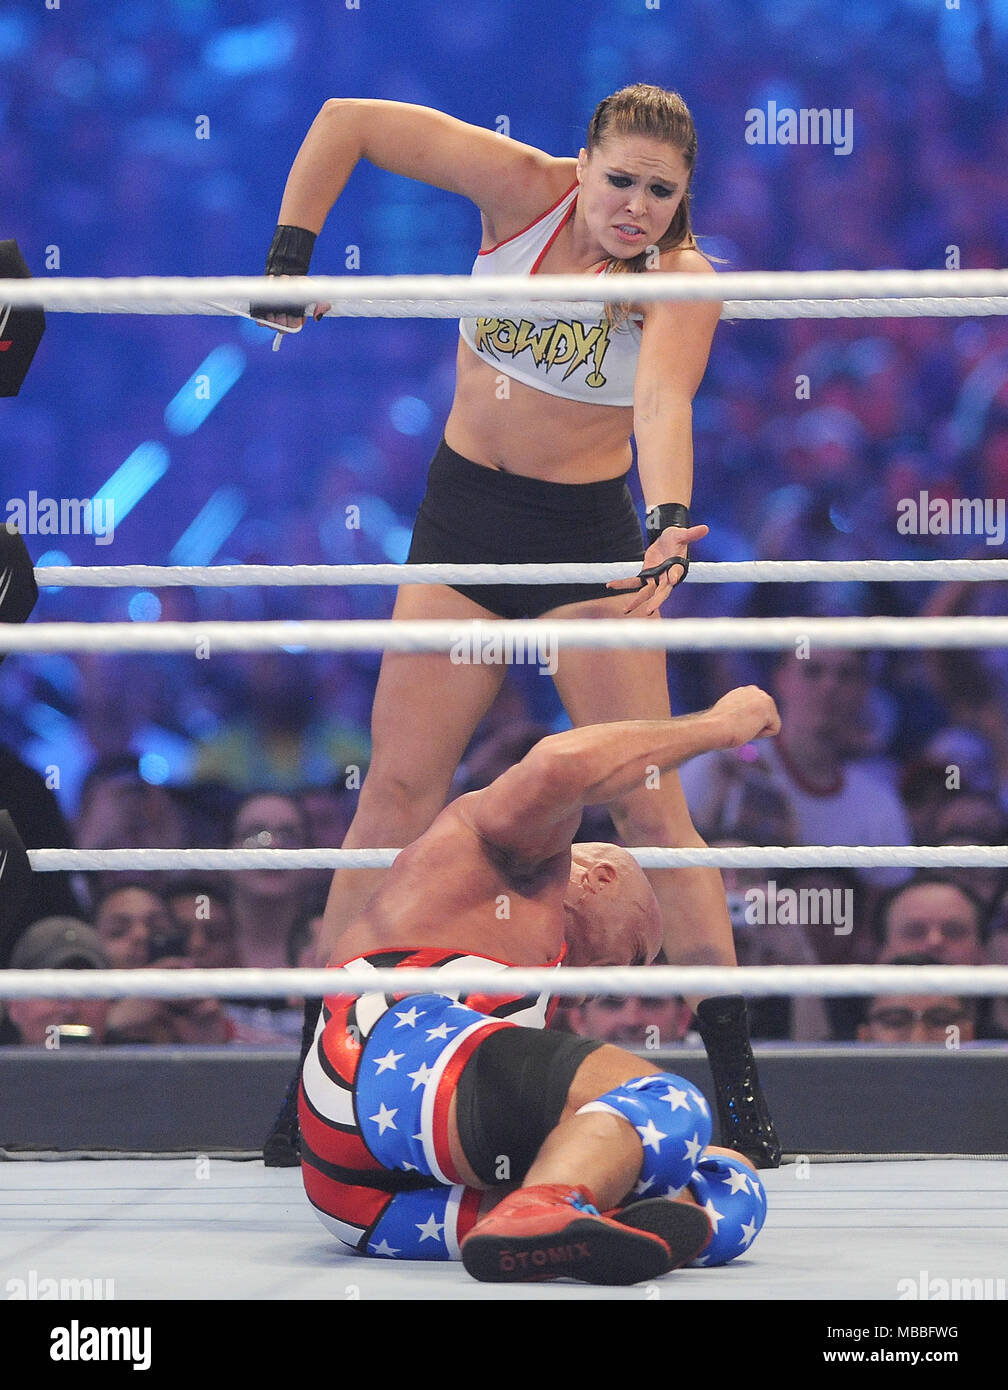 New Orleans, LA, USA. 8th Apr, 2018. Ronda Rousey at WWE Wrestlemania 34 at the Mercedes-Benz Superdome in New Orleans, Louisiana on April 8, 2018. Credit: George Napolitano/Media Punch/Alamy Live News Stock Photo